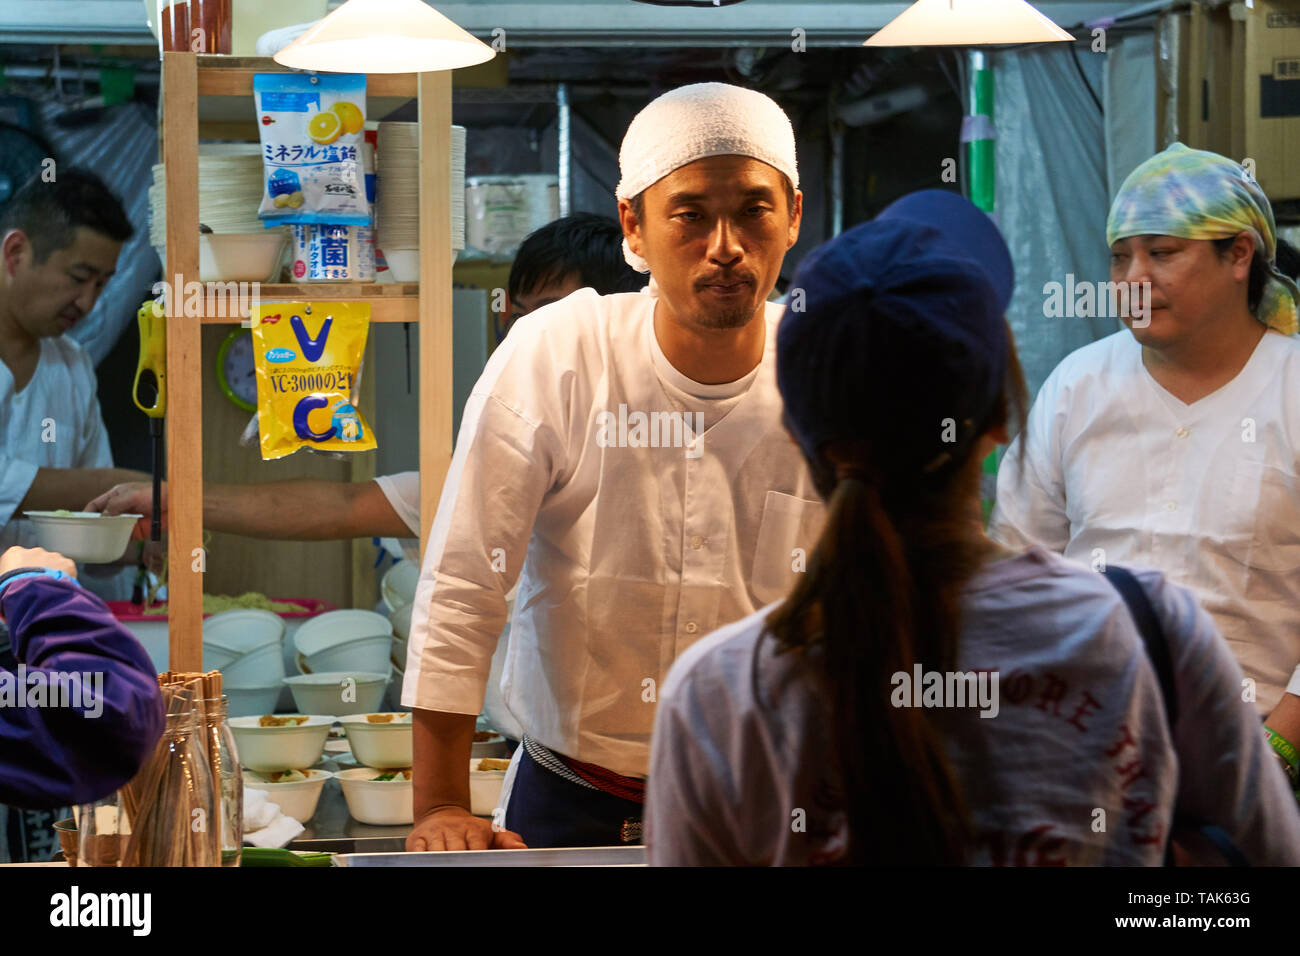 A Japanese woman makes an order at a food stall at the 2016 Fuji Rock Festival, while the Japanese chef waits impatiently. Stock Photo